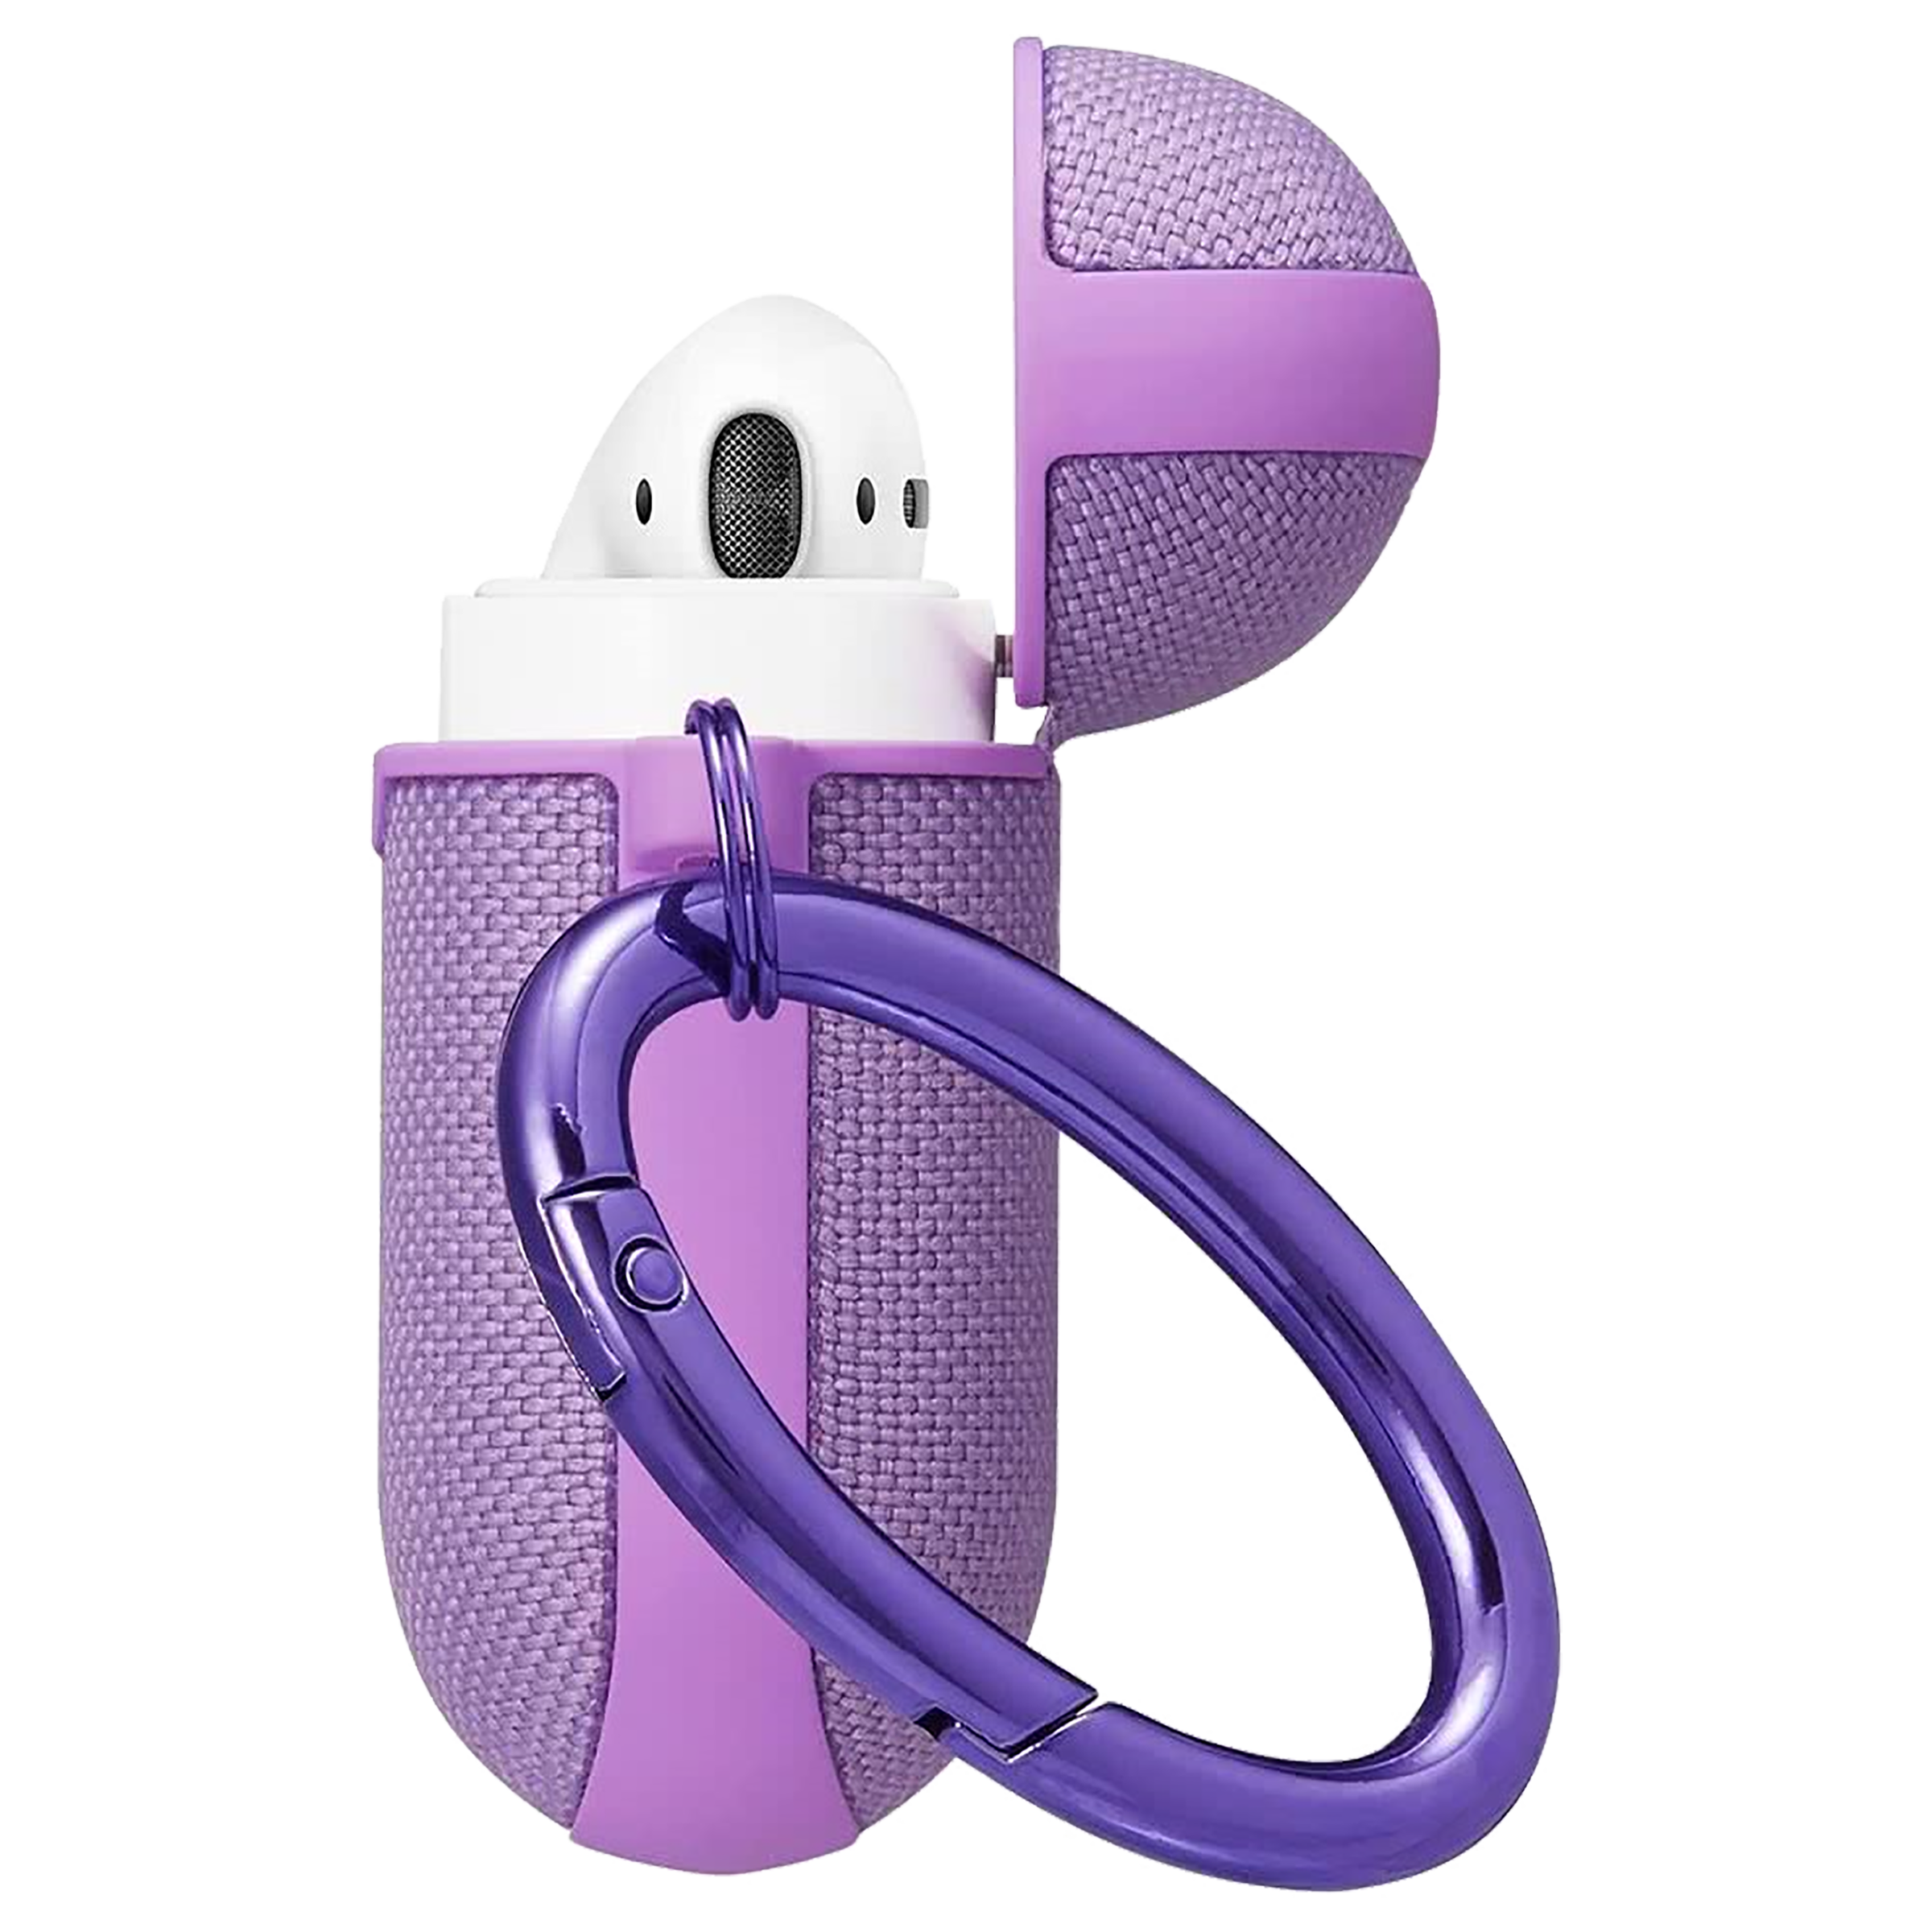 Spigen Urban Fit PC & Fabric Full Cover Case For Apple AirPods 1/2 (Supports LED Light & Wireless Charging, 074CS27599, Purple)_2